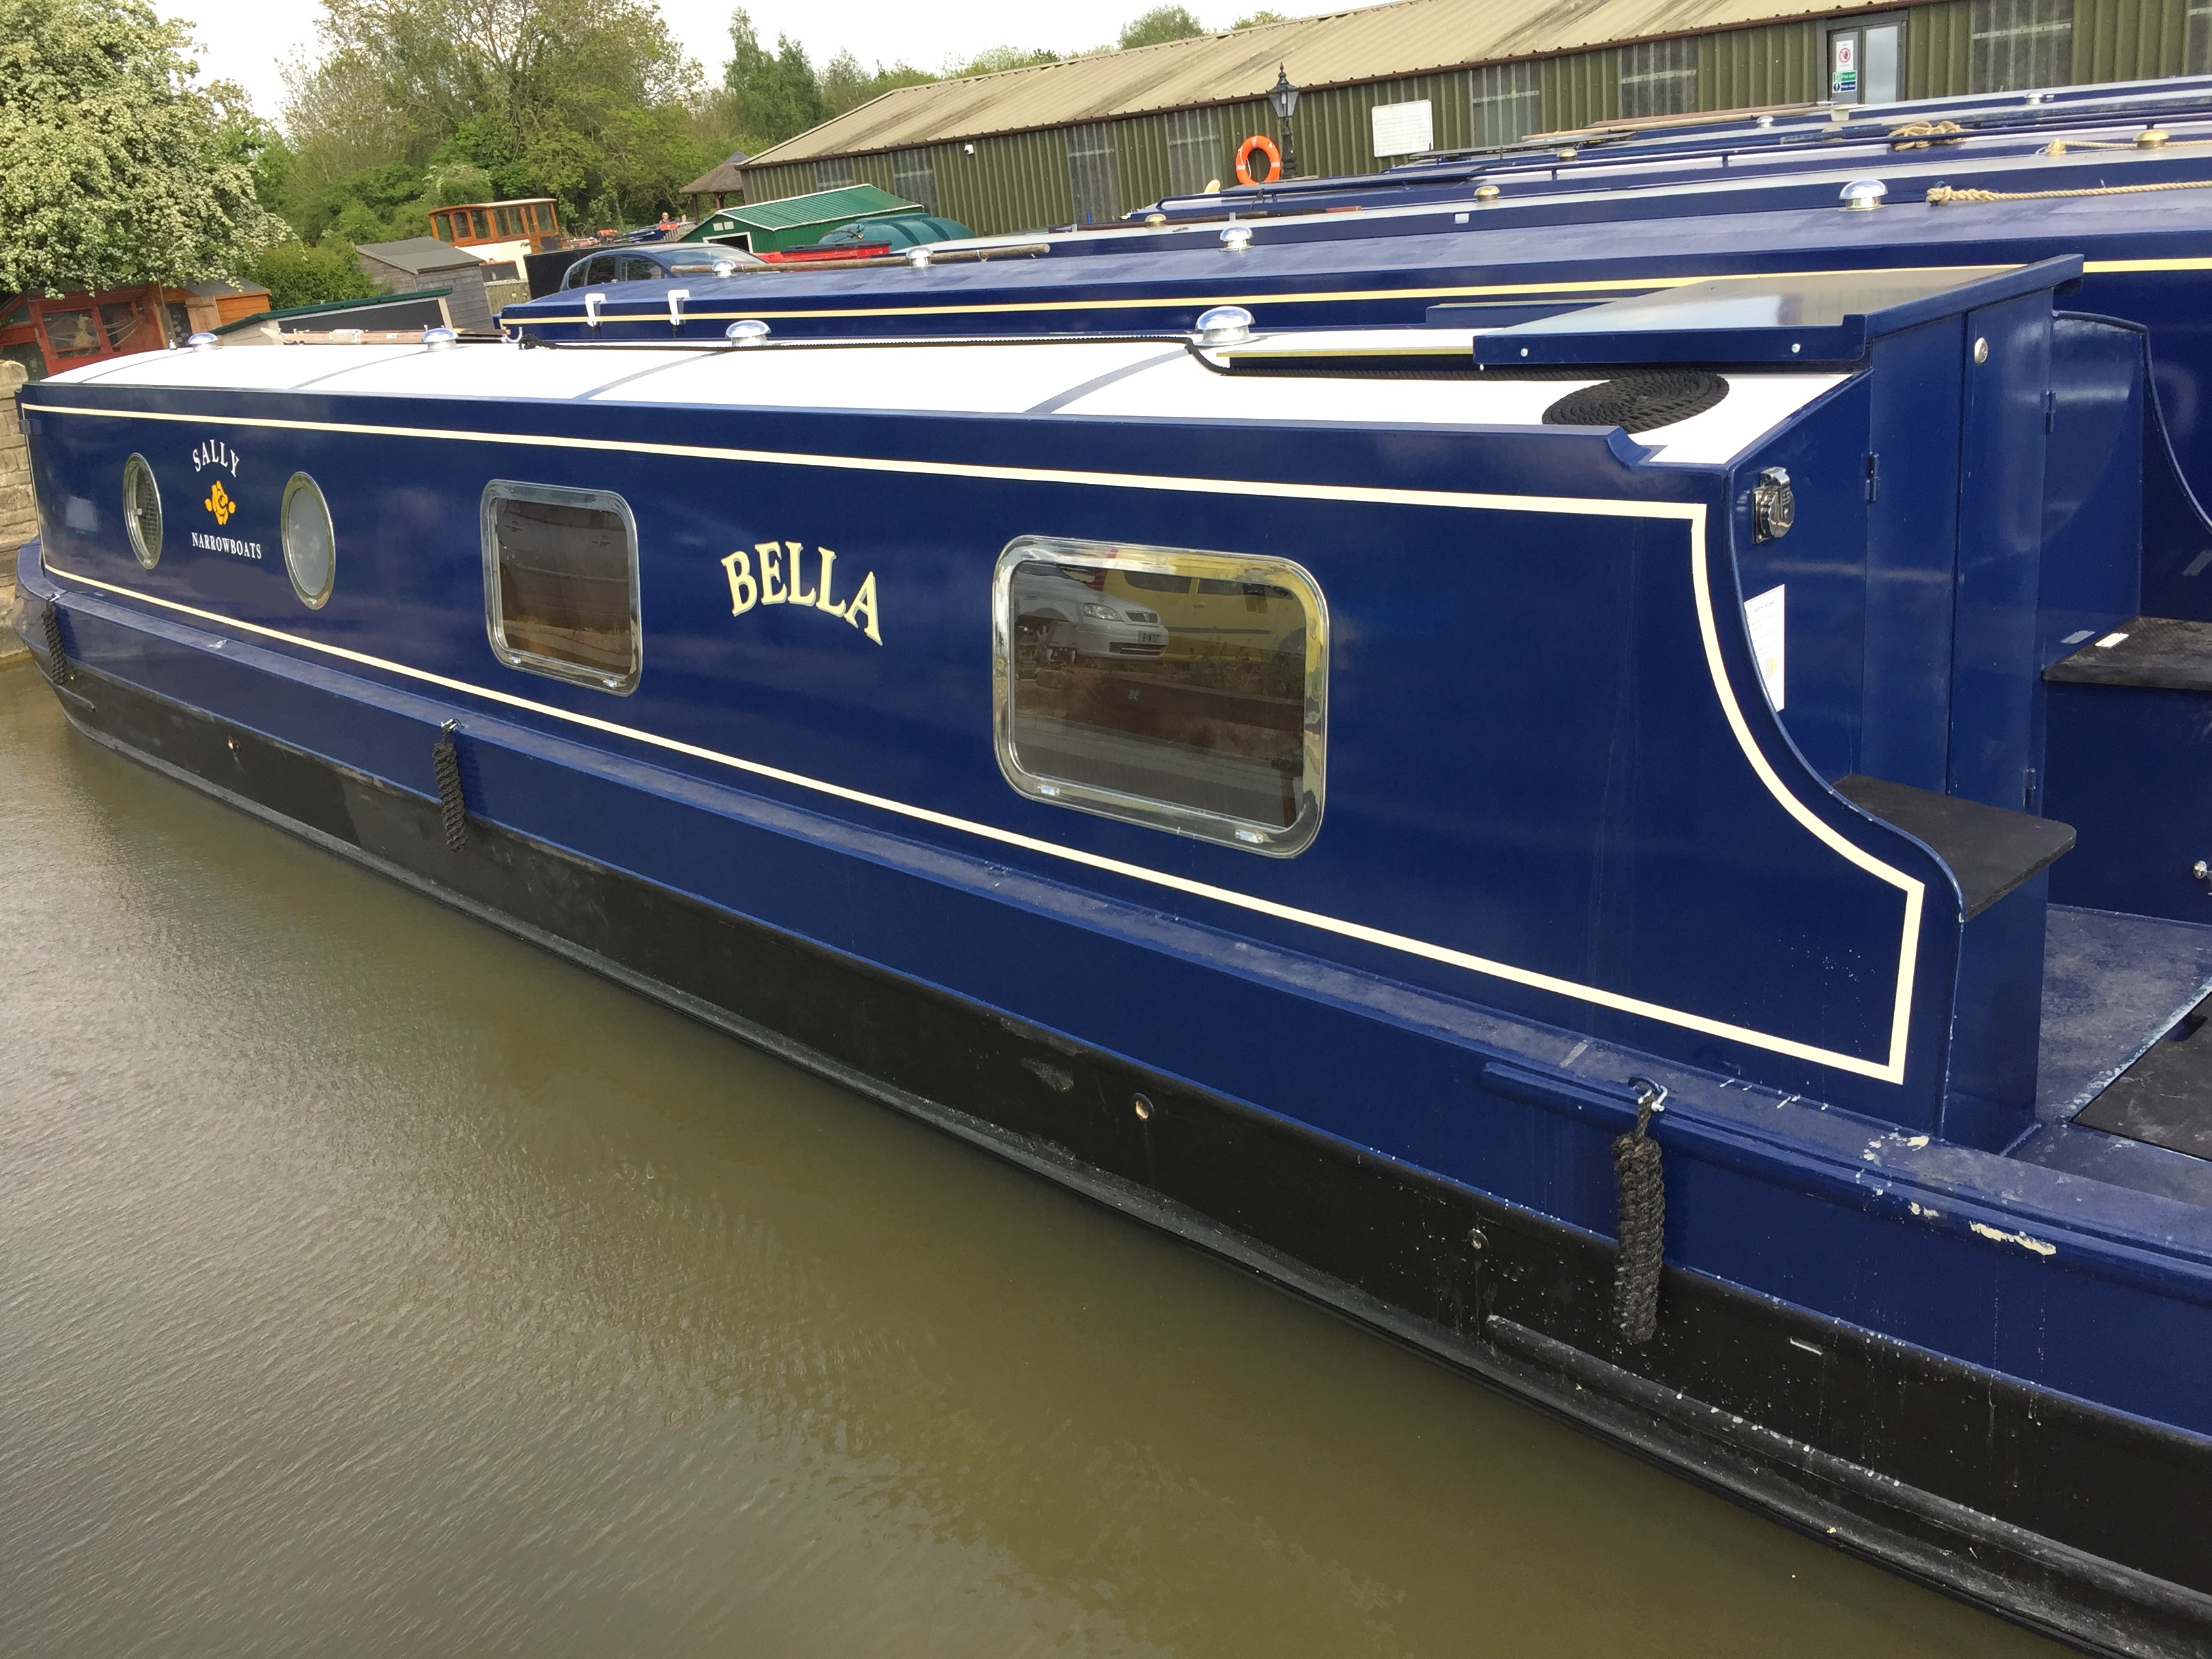 The S-Bella class canal boat